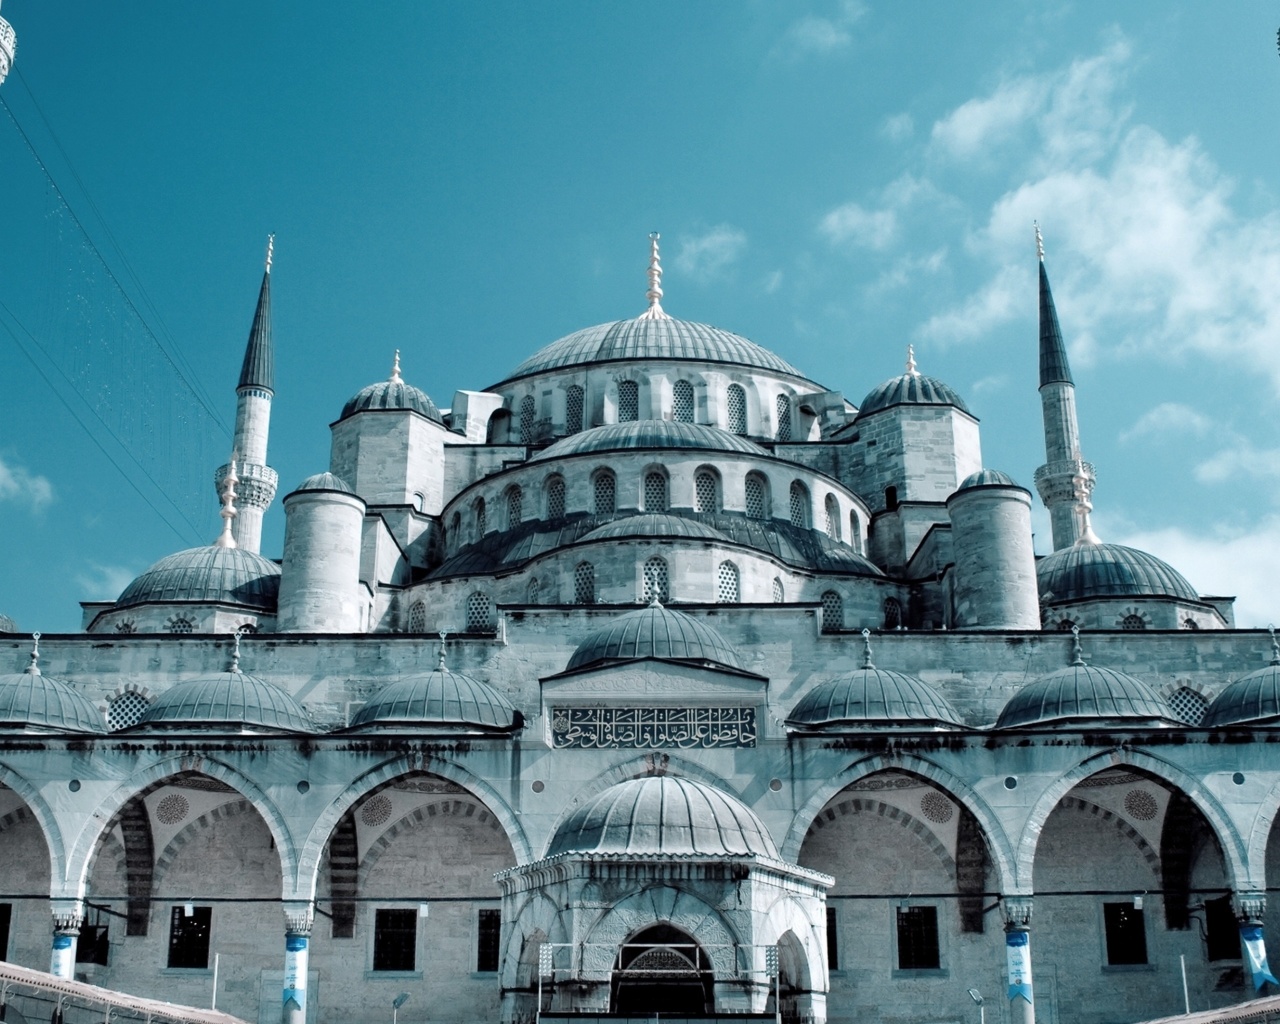 Sultan Ahmed Mosque in Istanbul screenshot #1 1280x1024